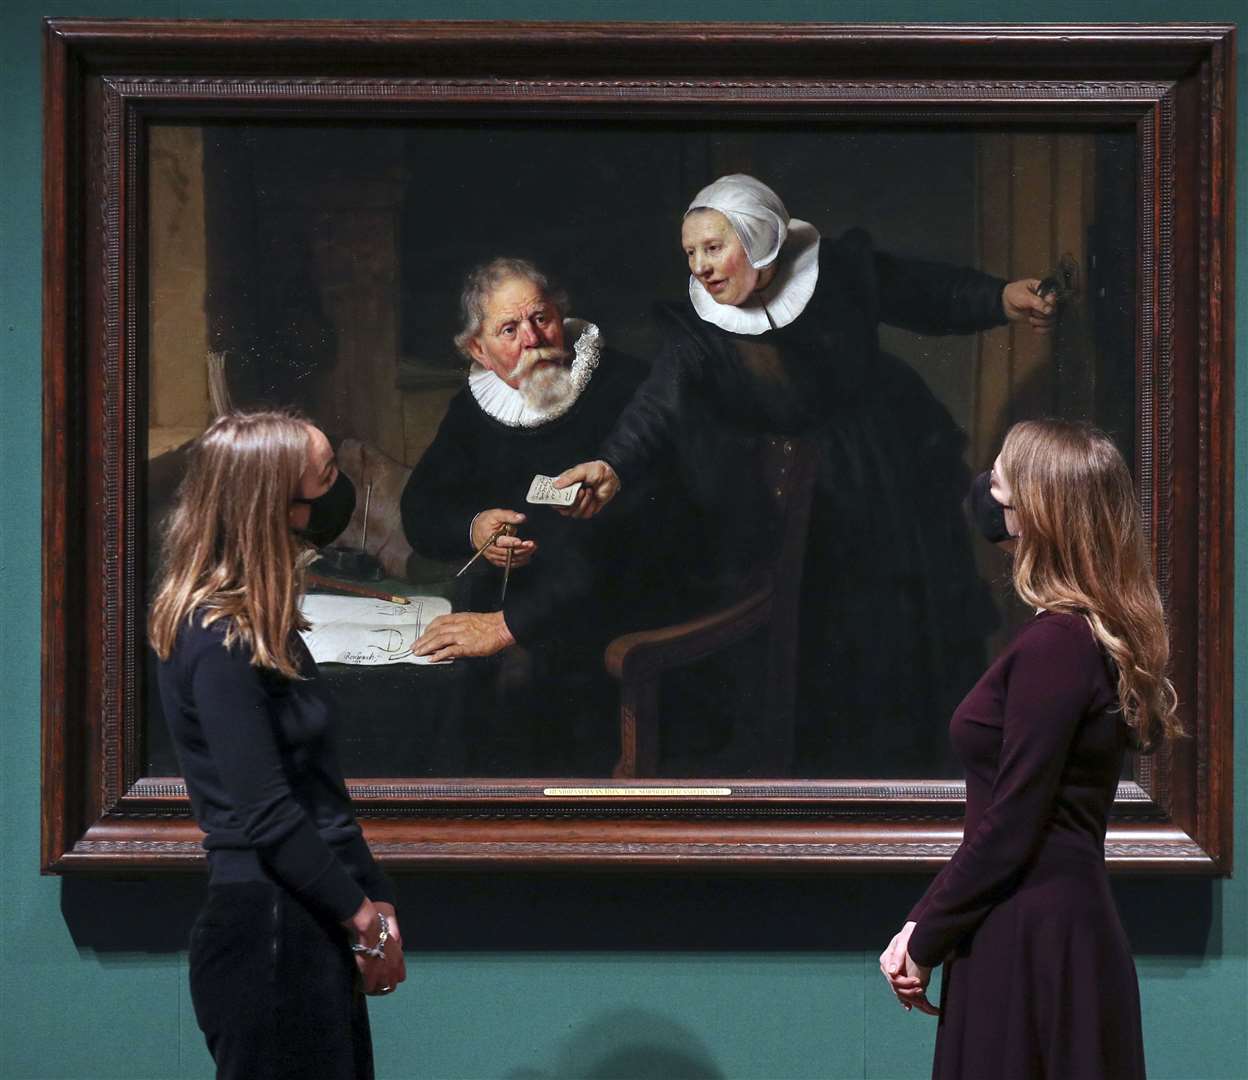 Women look at Rembrandt’s painting The Shipbuilder and his Wife (Steve Parsons/PA)